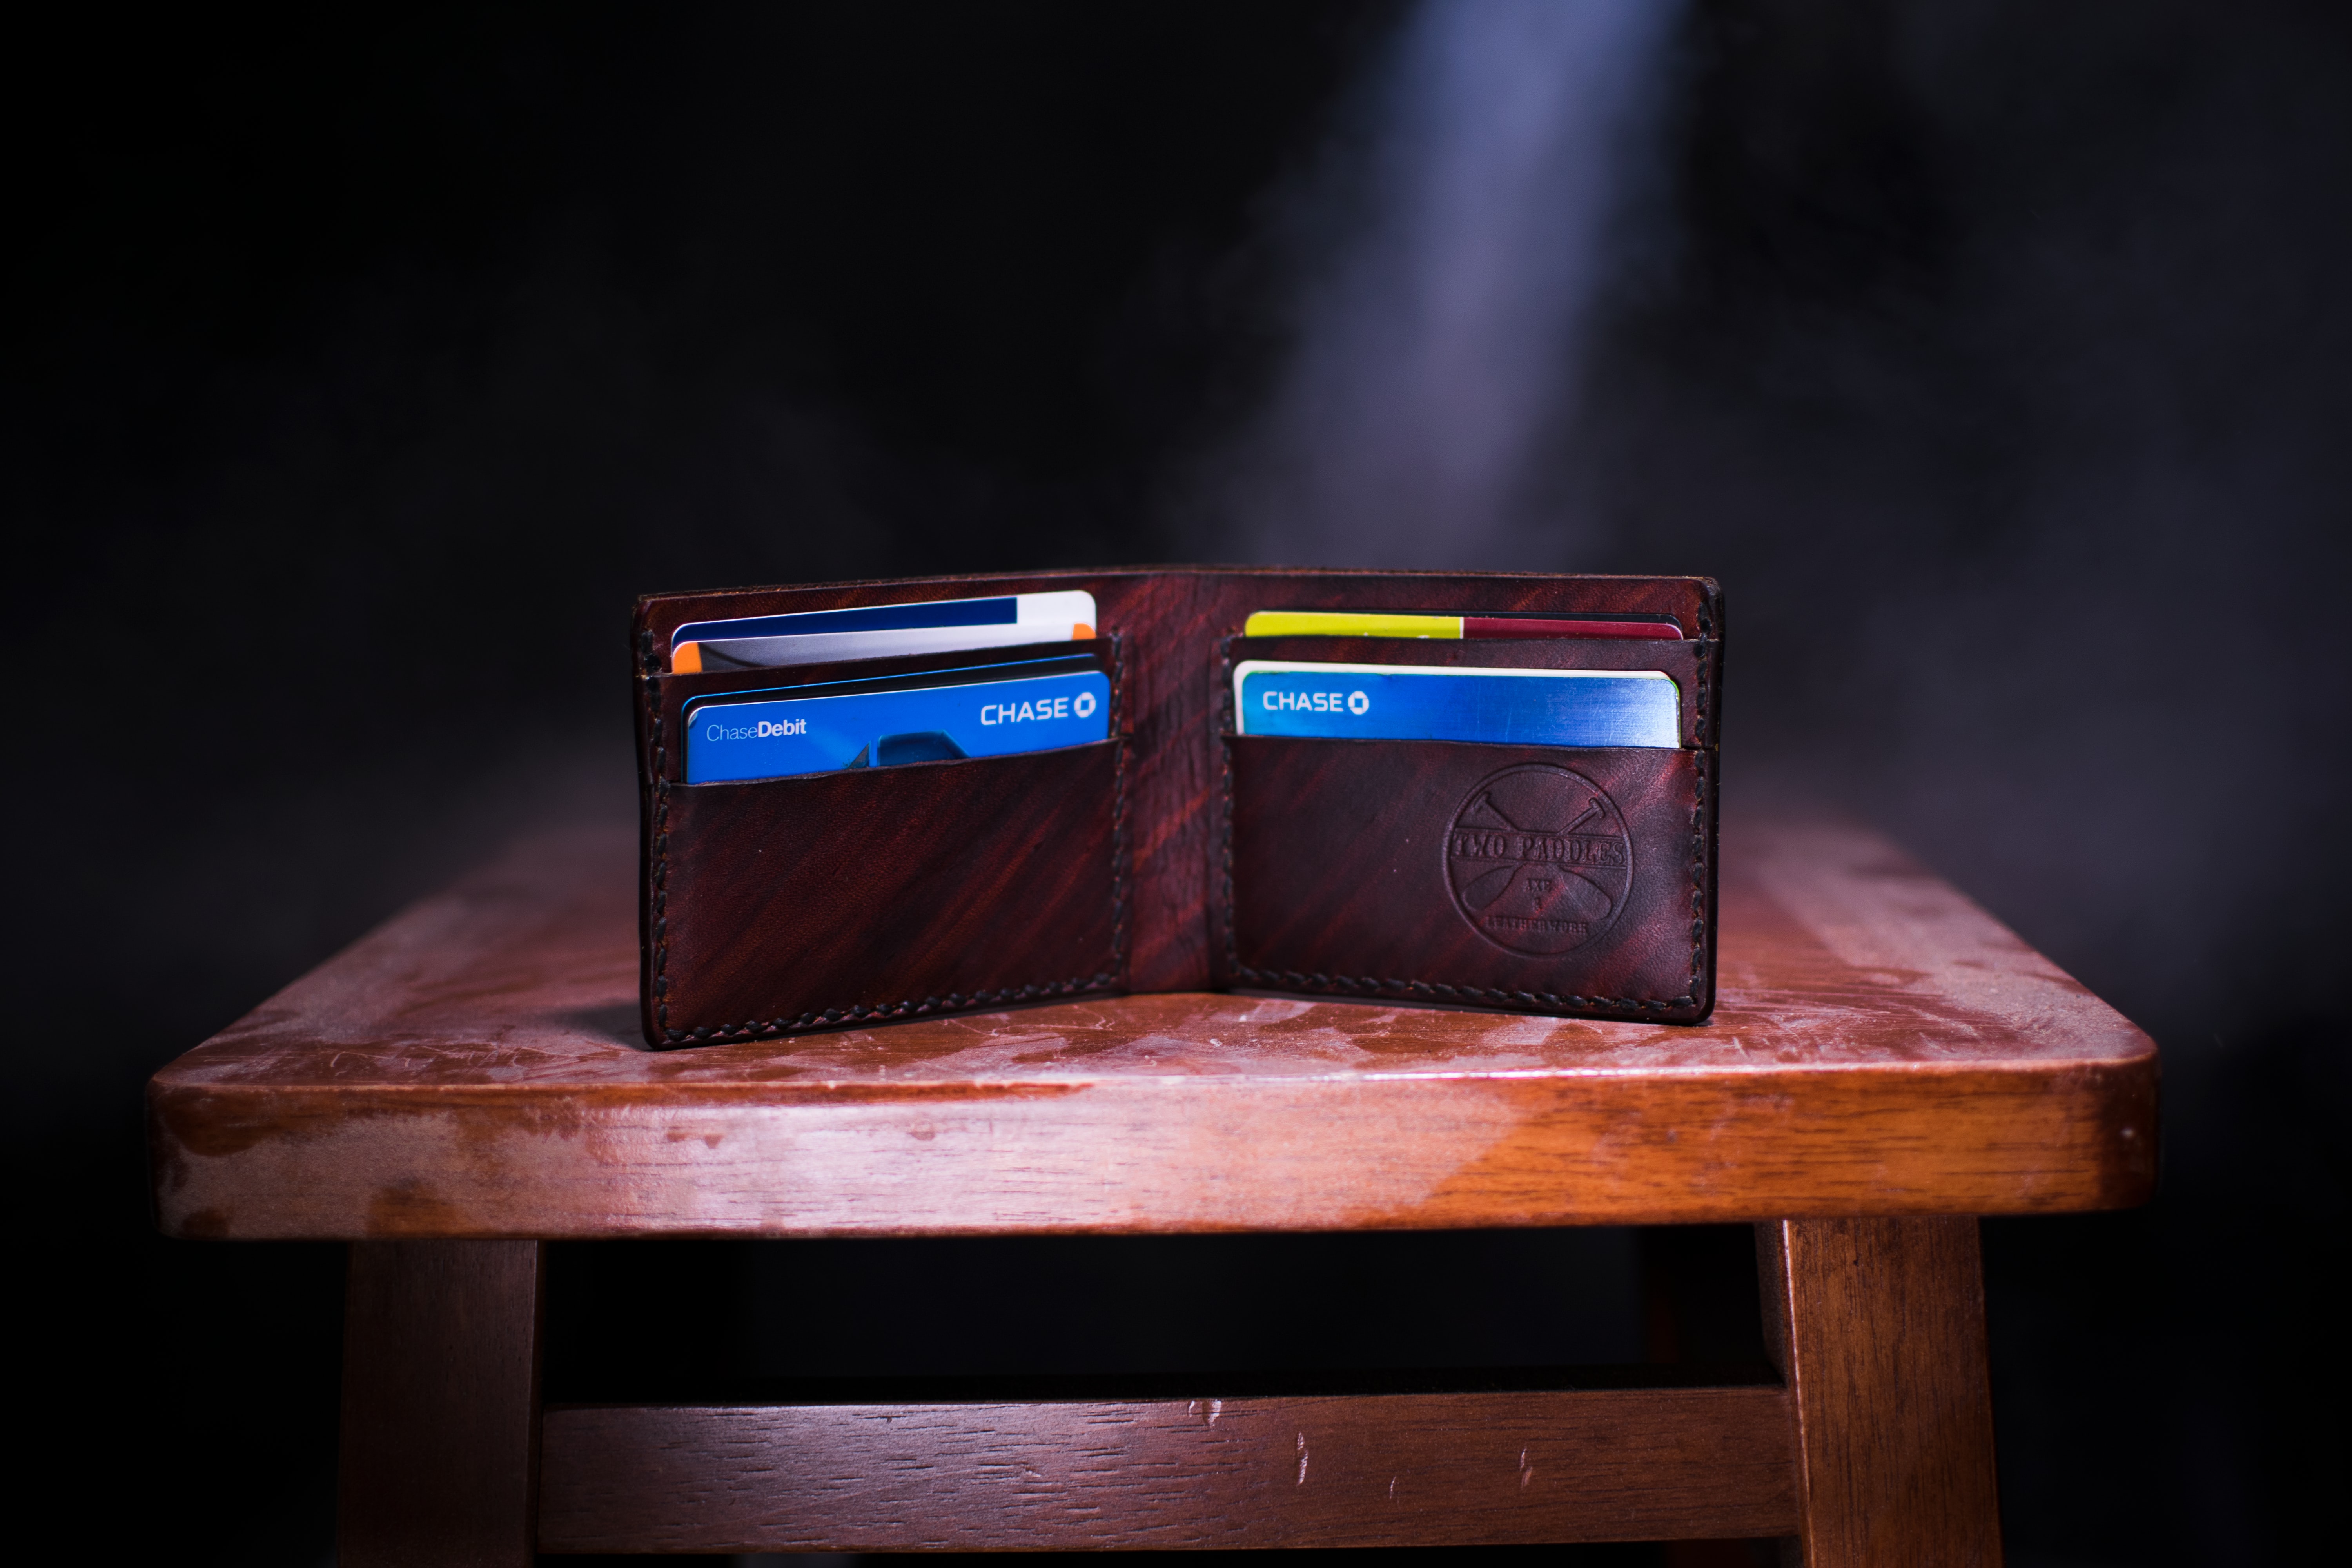 Handmade brown leather wallet with credit cards sitting on brown wooden stool; image by Two Paddles Axe and Leatherwork, via Unsplash.com.